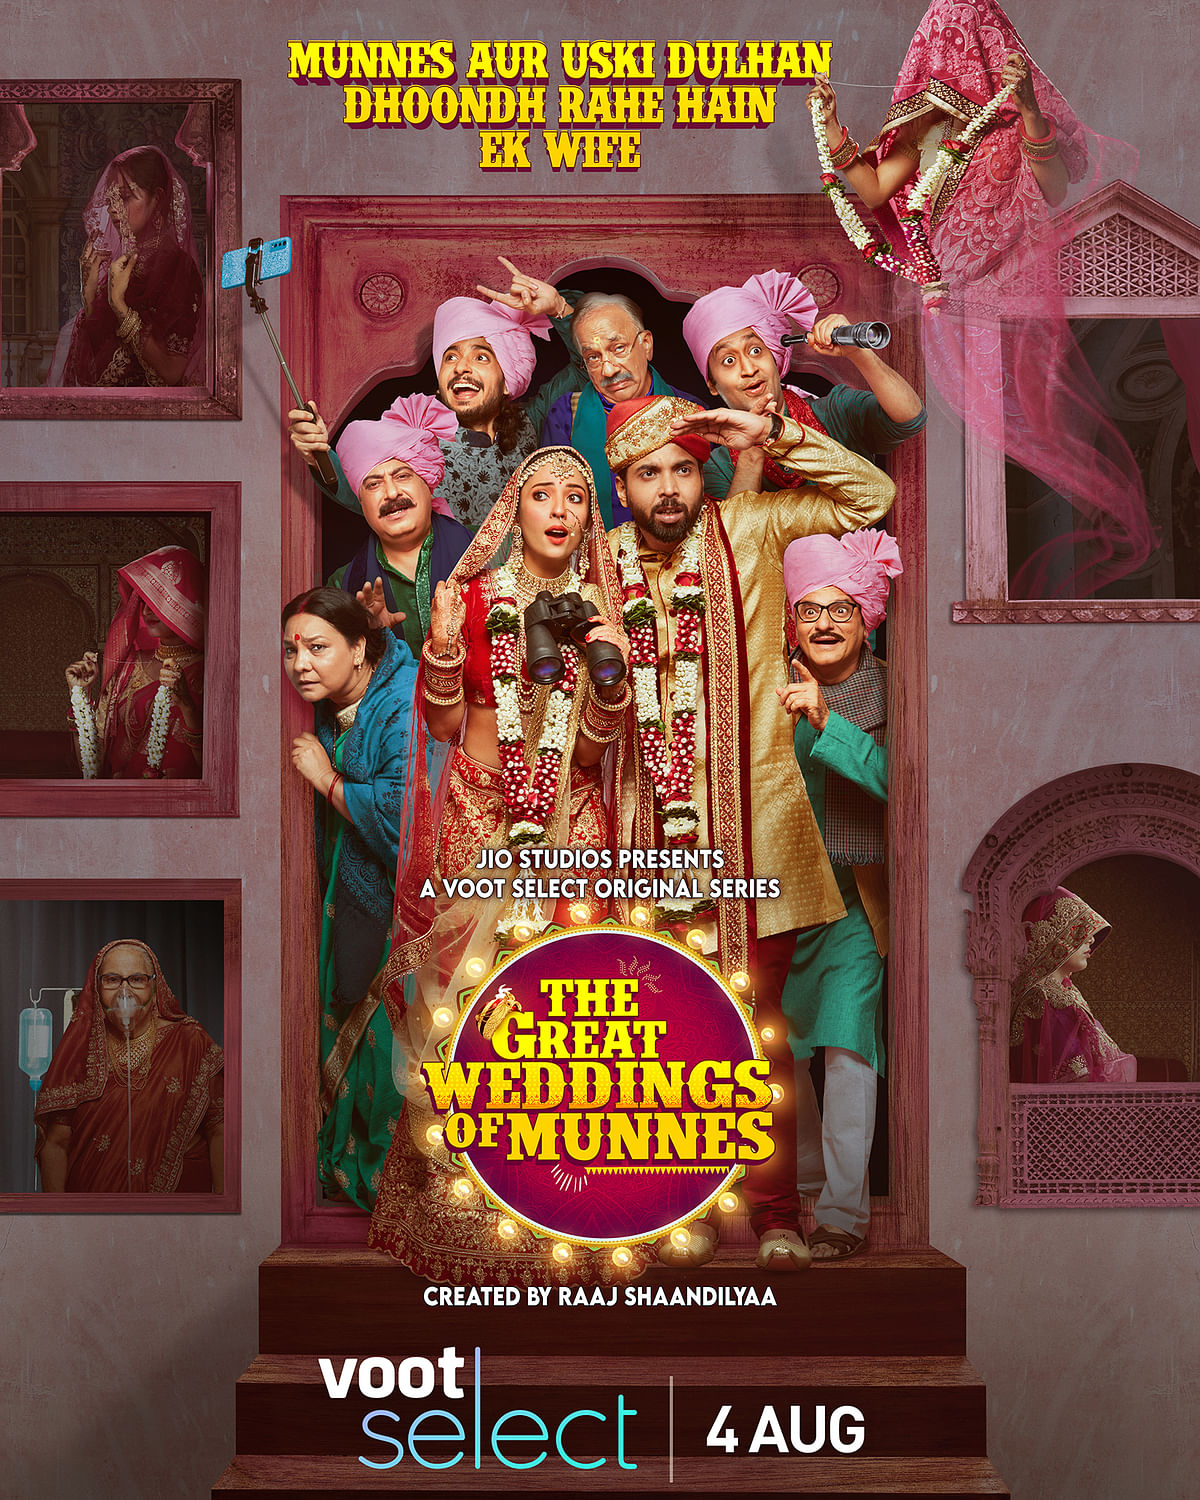 Alia Bhatt's 'Darlings' releases on 5 August while 'House of the Dragon' releases on 22 August.